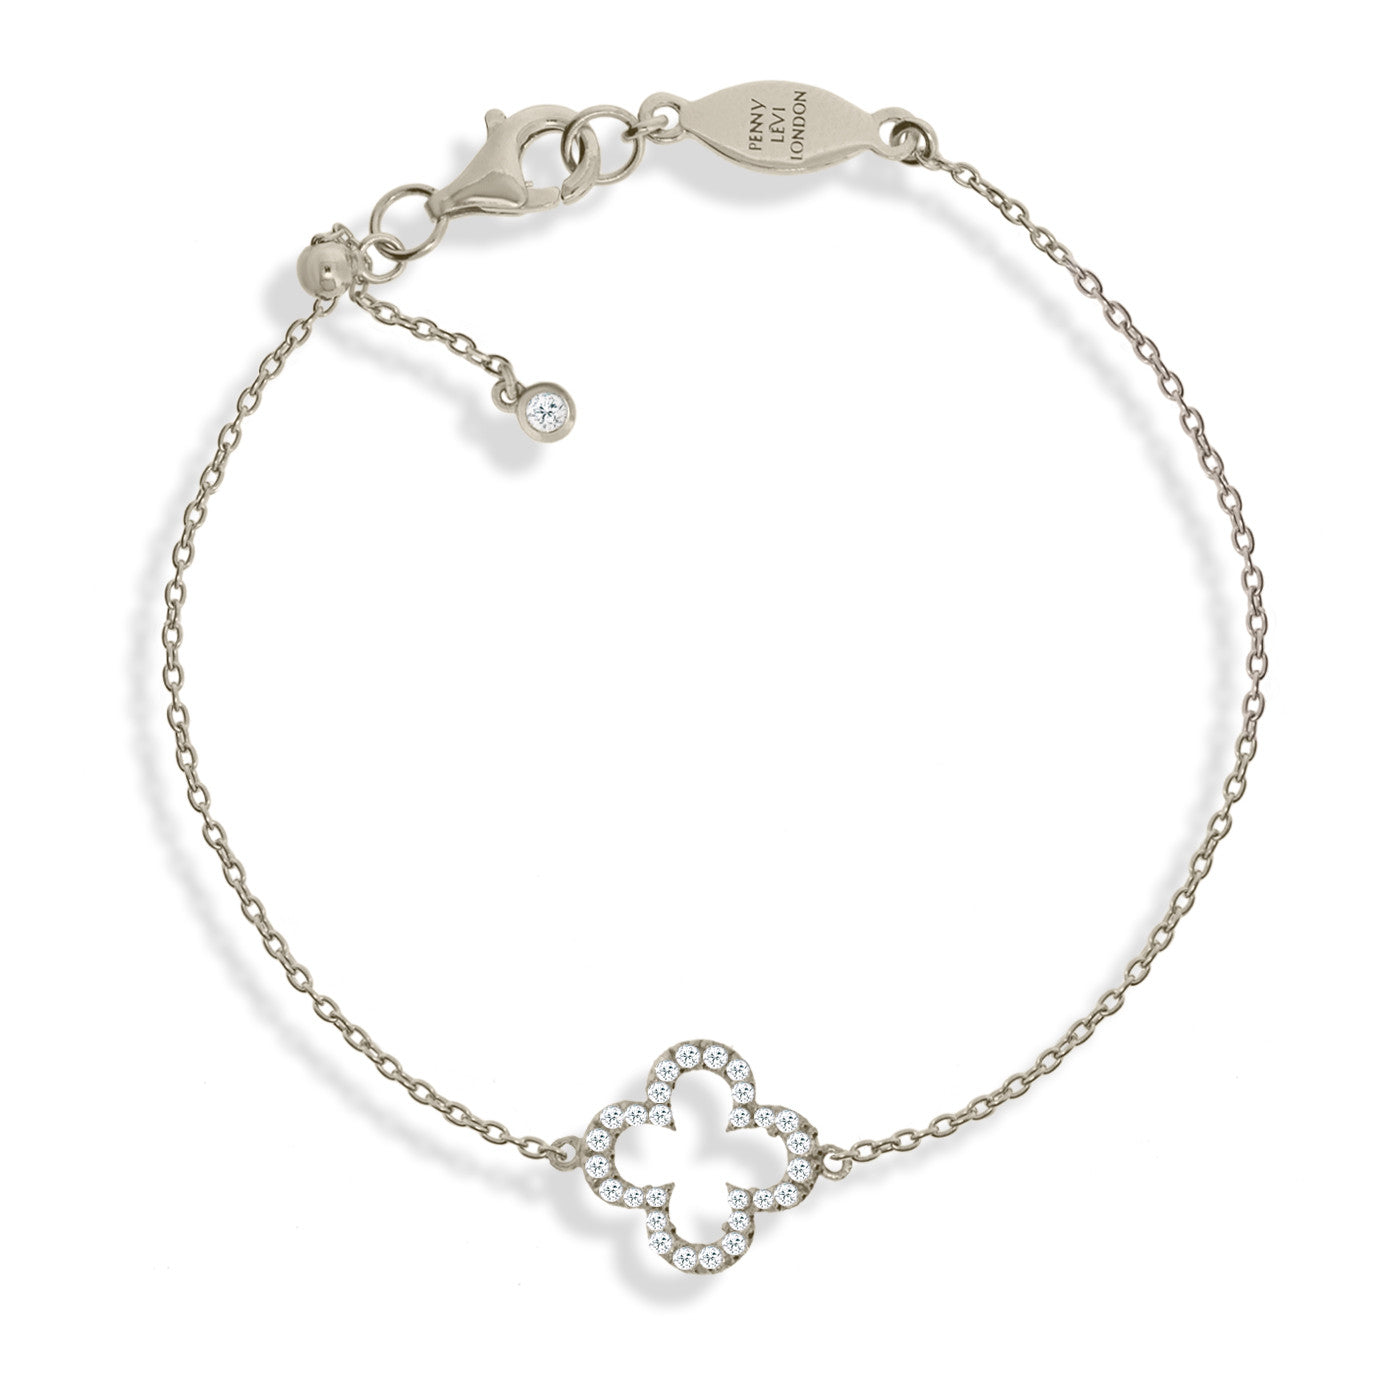 BT-1/S - Adjustable Chain Bracelet with Clover Charm and CZ Decoration